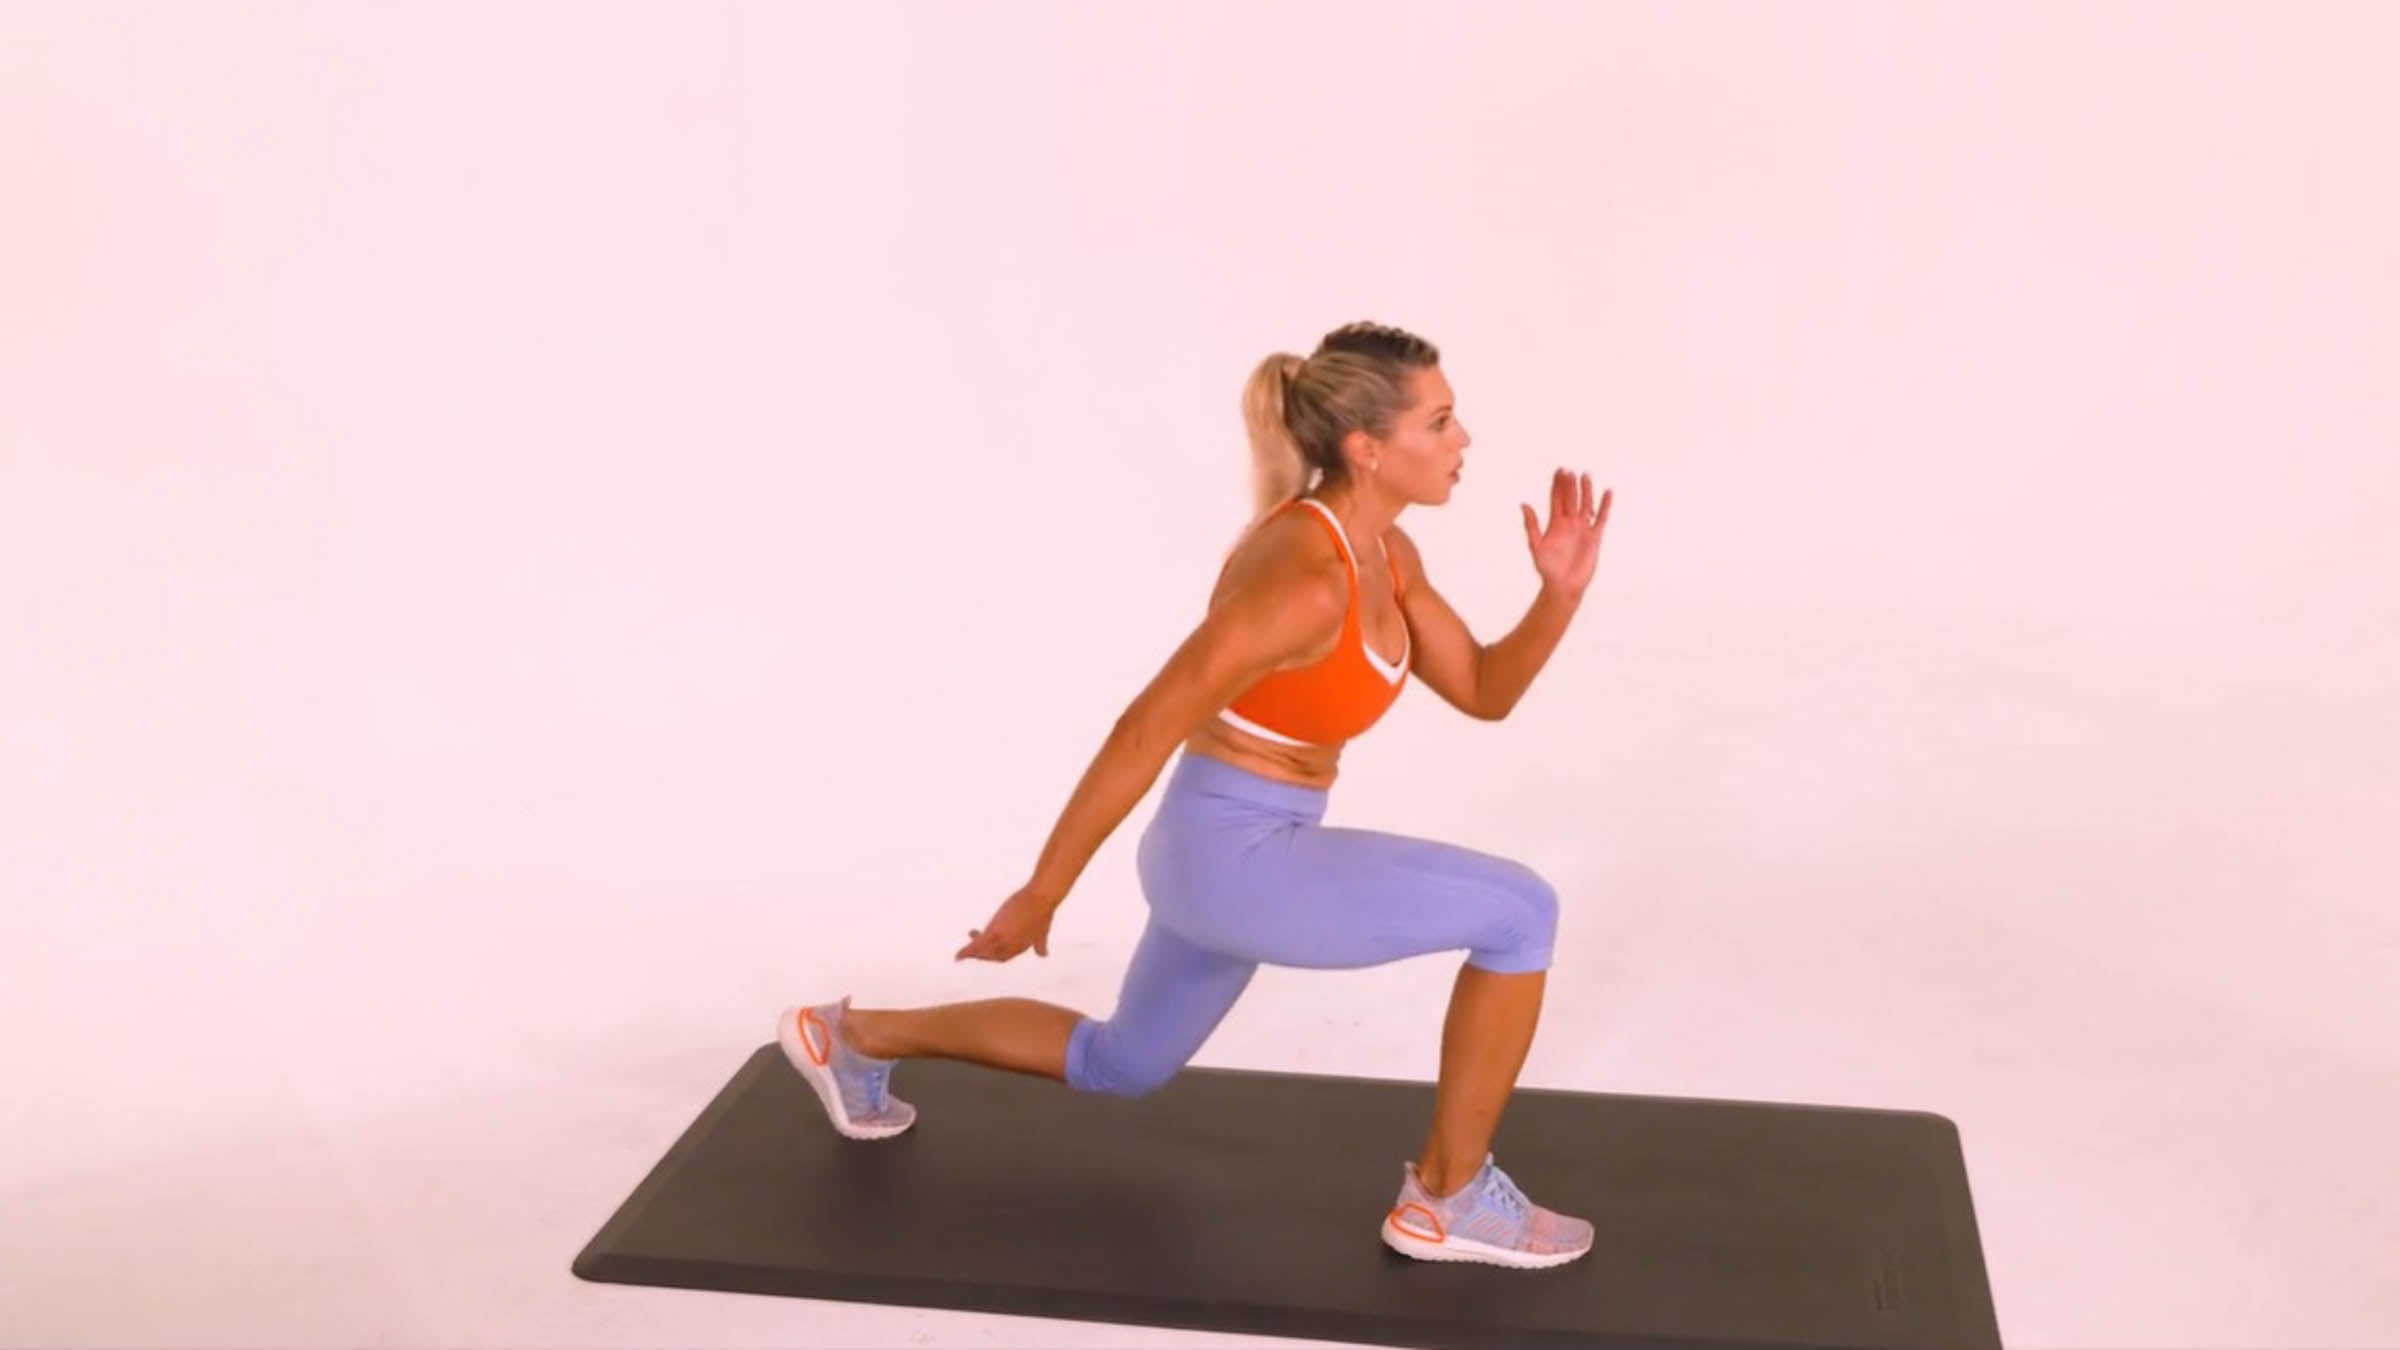 switch lunges